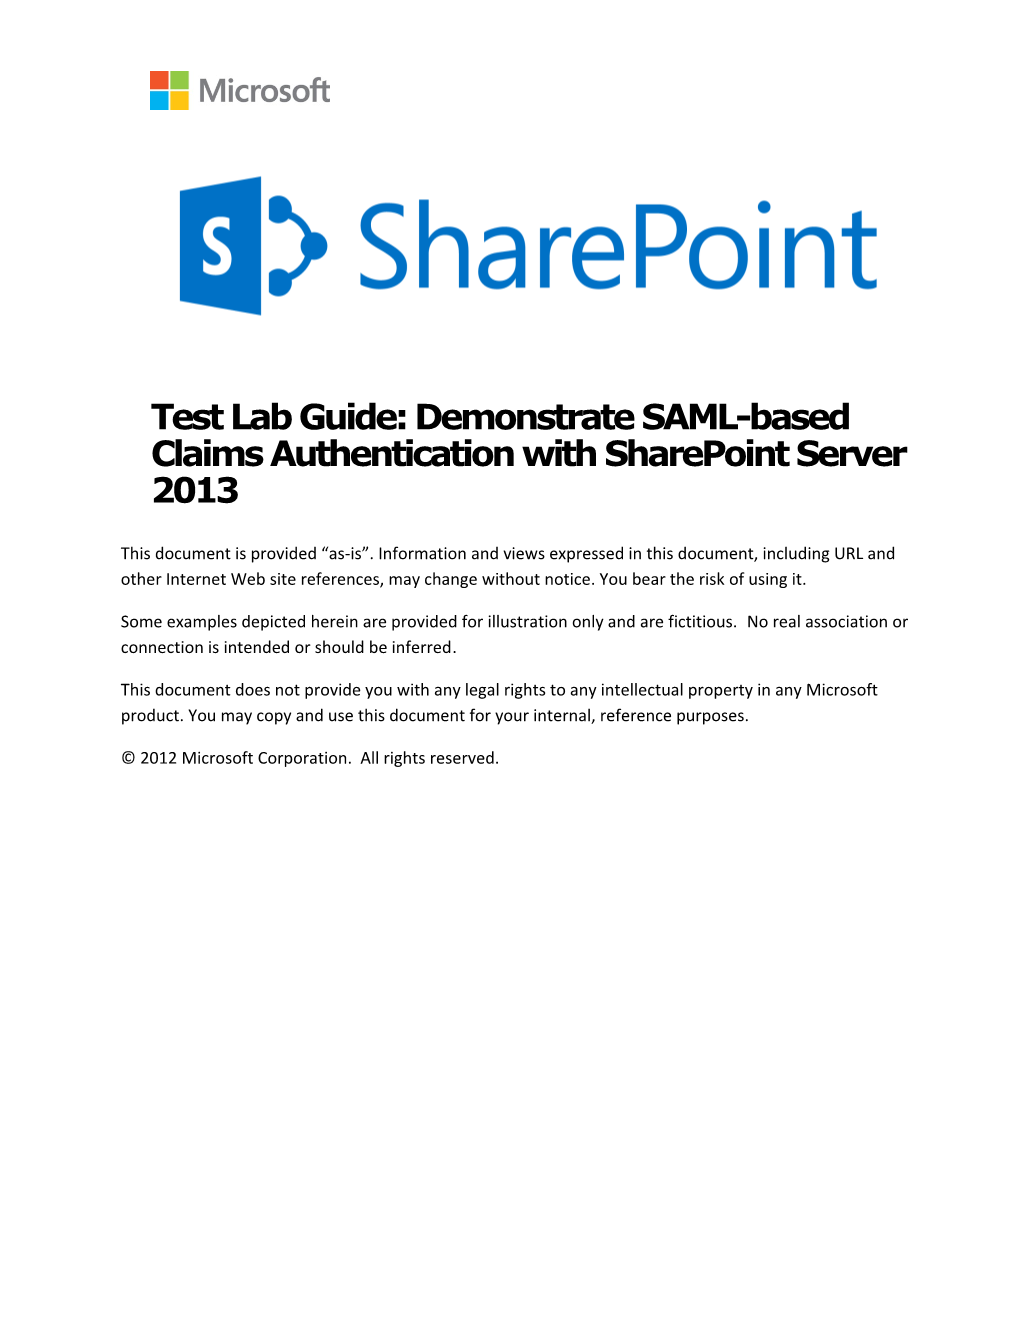 Test Lab Guide: Demonstrate SAML-Based Claims Authentication with Sharepoint Server 2013